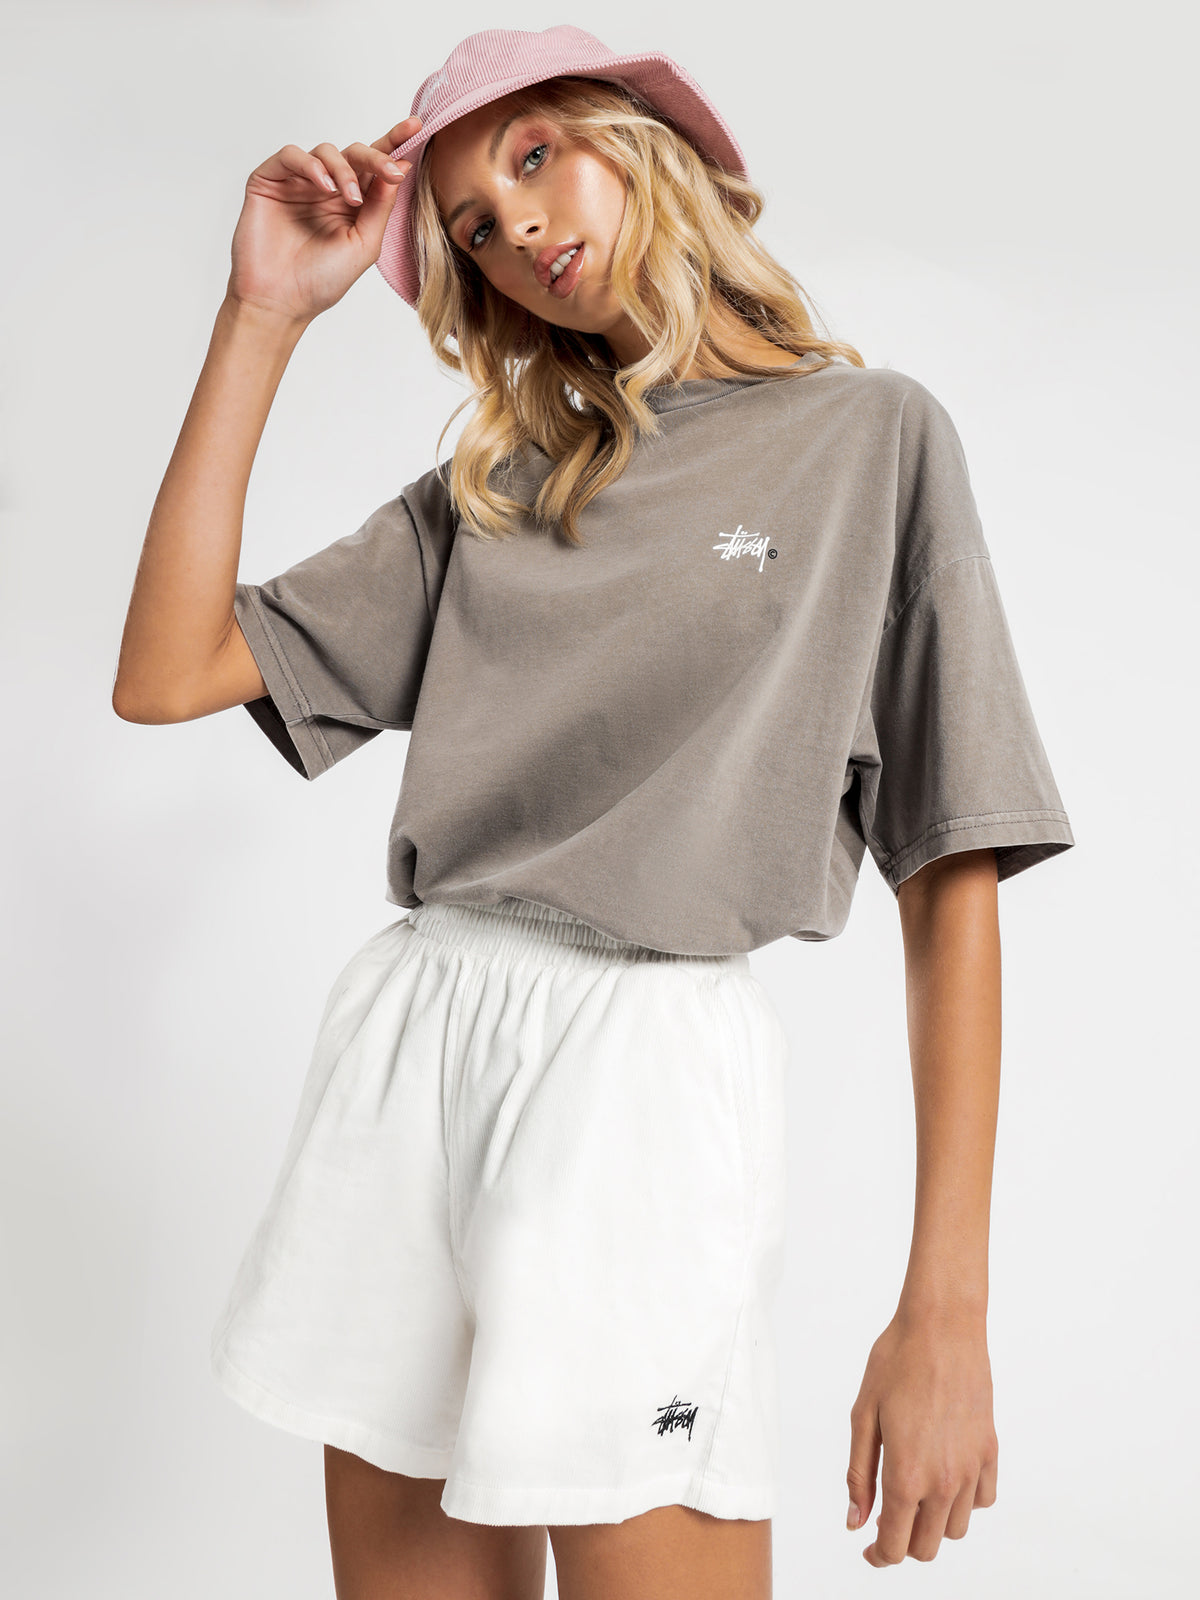 Graffiti Pigment Relaxed T-Shirt in Taupe